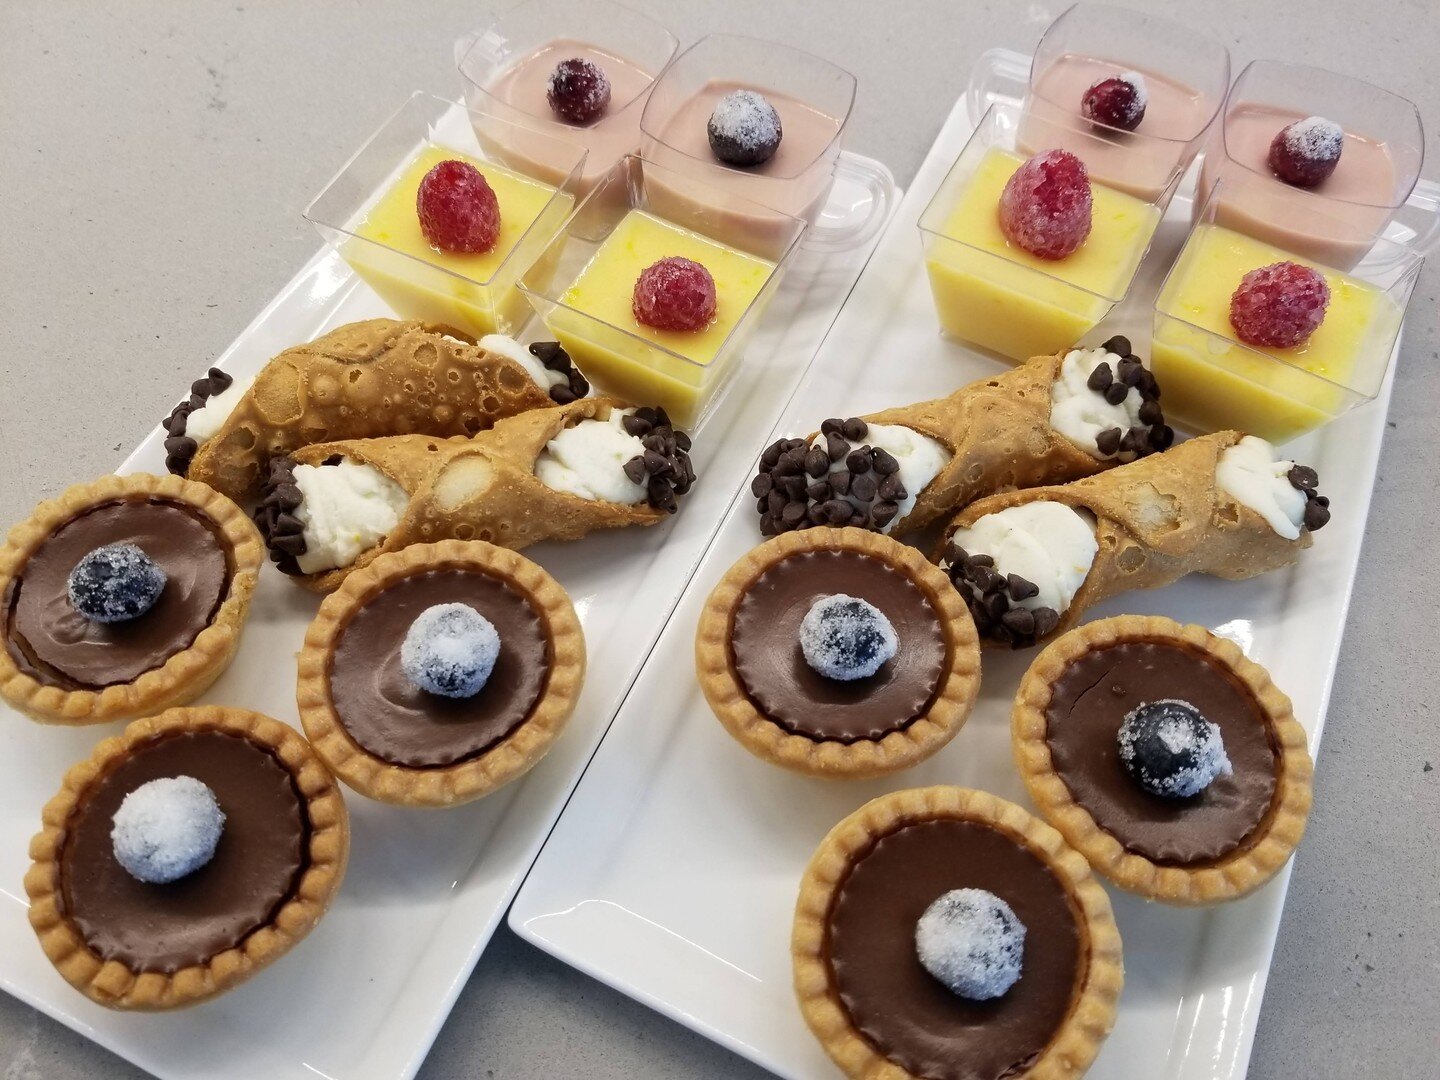 Craving something sweet? Indulge in our delectable desserts, crafted with love and attention to detail. From decadent cakes to bite-sized treats, we'll satisfy your sweet tooth and leave your guests wanting more. 

Contact us to plan your dessert spr